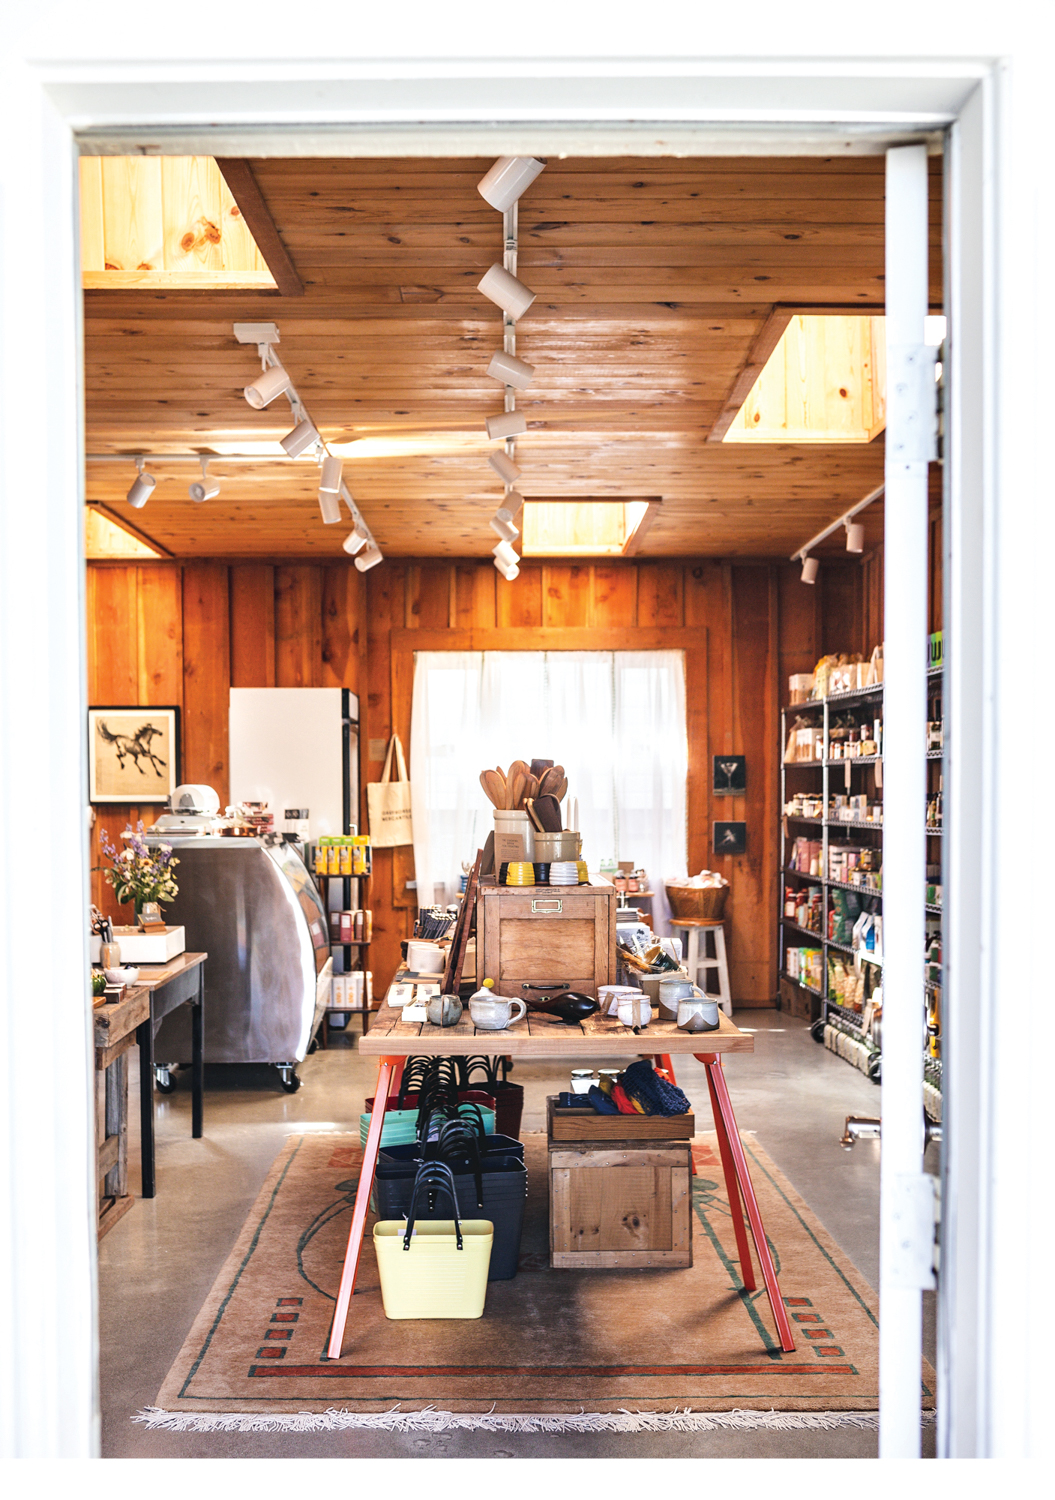 home goods shop with vintage wares as part of a Whidbey Island design destination